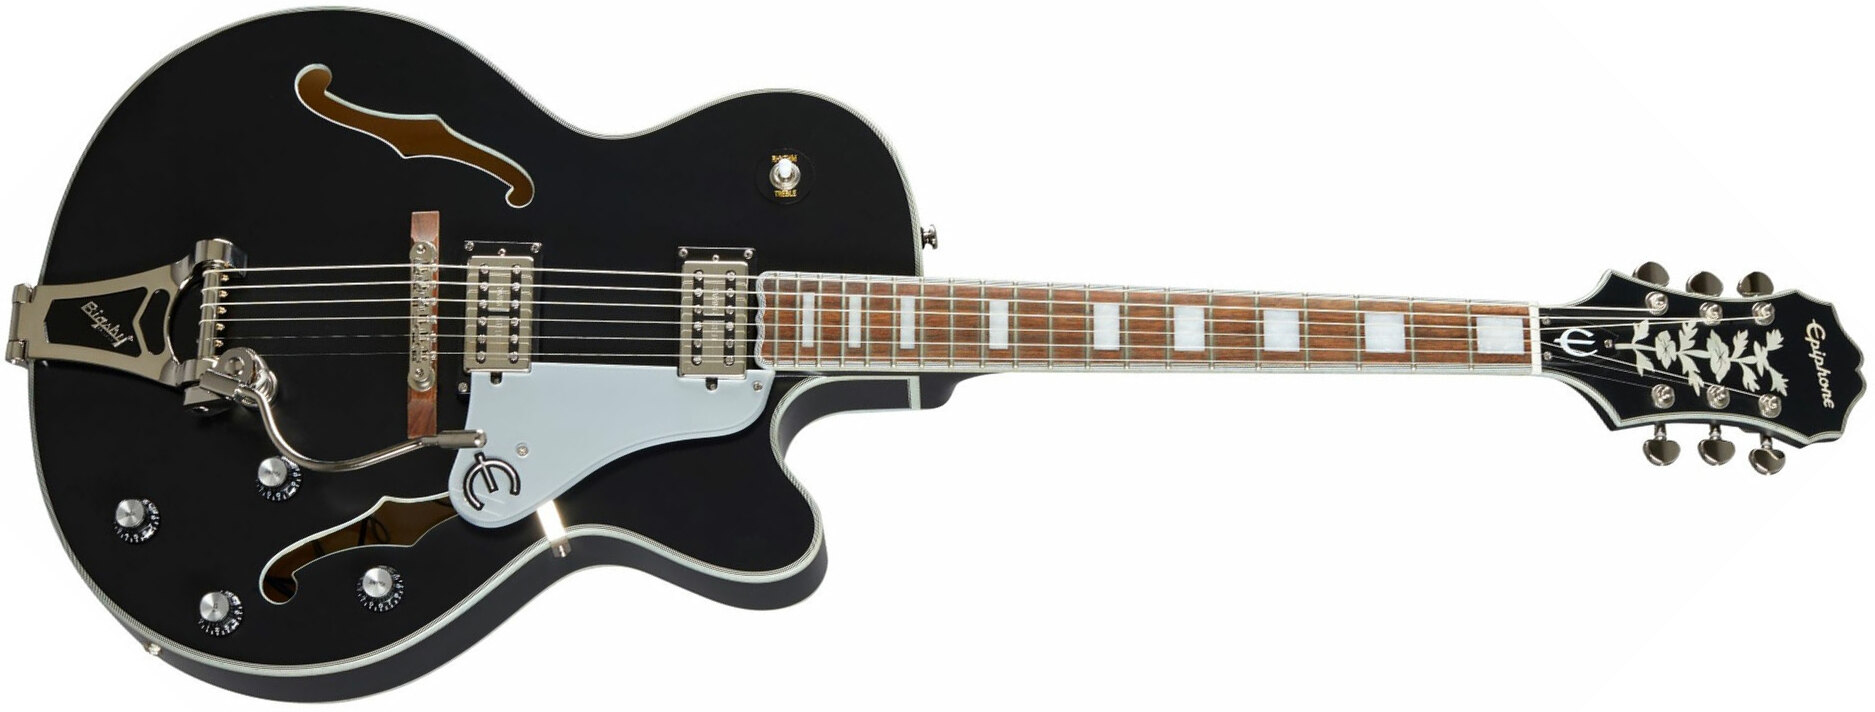 Epiphone Emperor Swingster Archtop 2h Trem Lau - Black Aged Gloss - Hollow-body electric guitar - Main picture